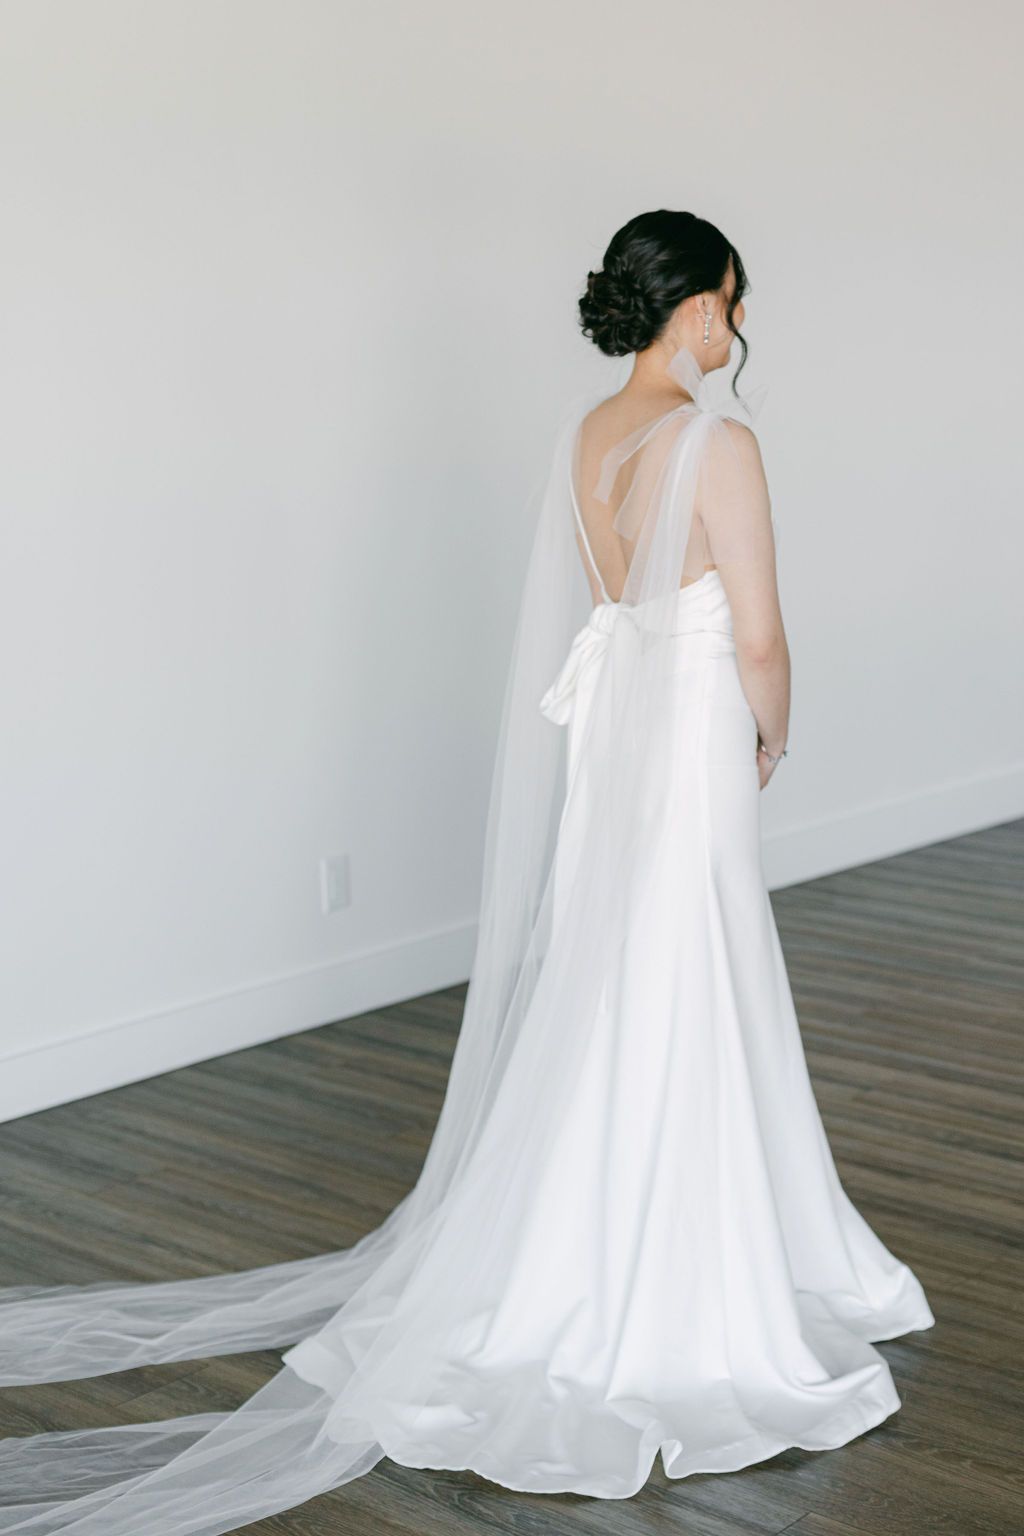 Bridal Inspiration, White wedding dress with sheer capelet sleeves